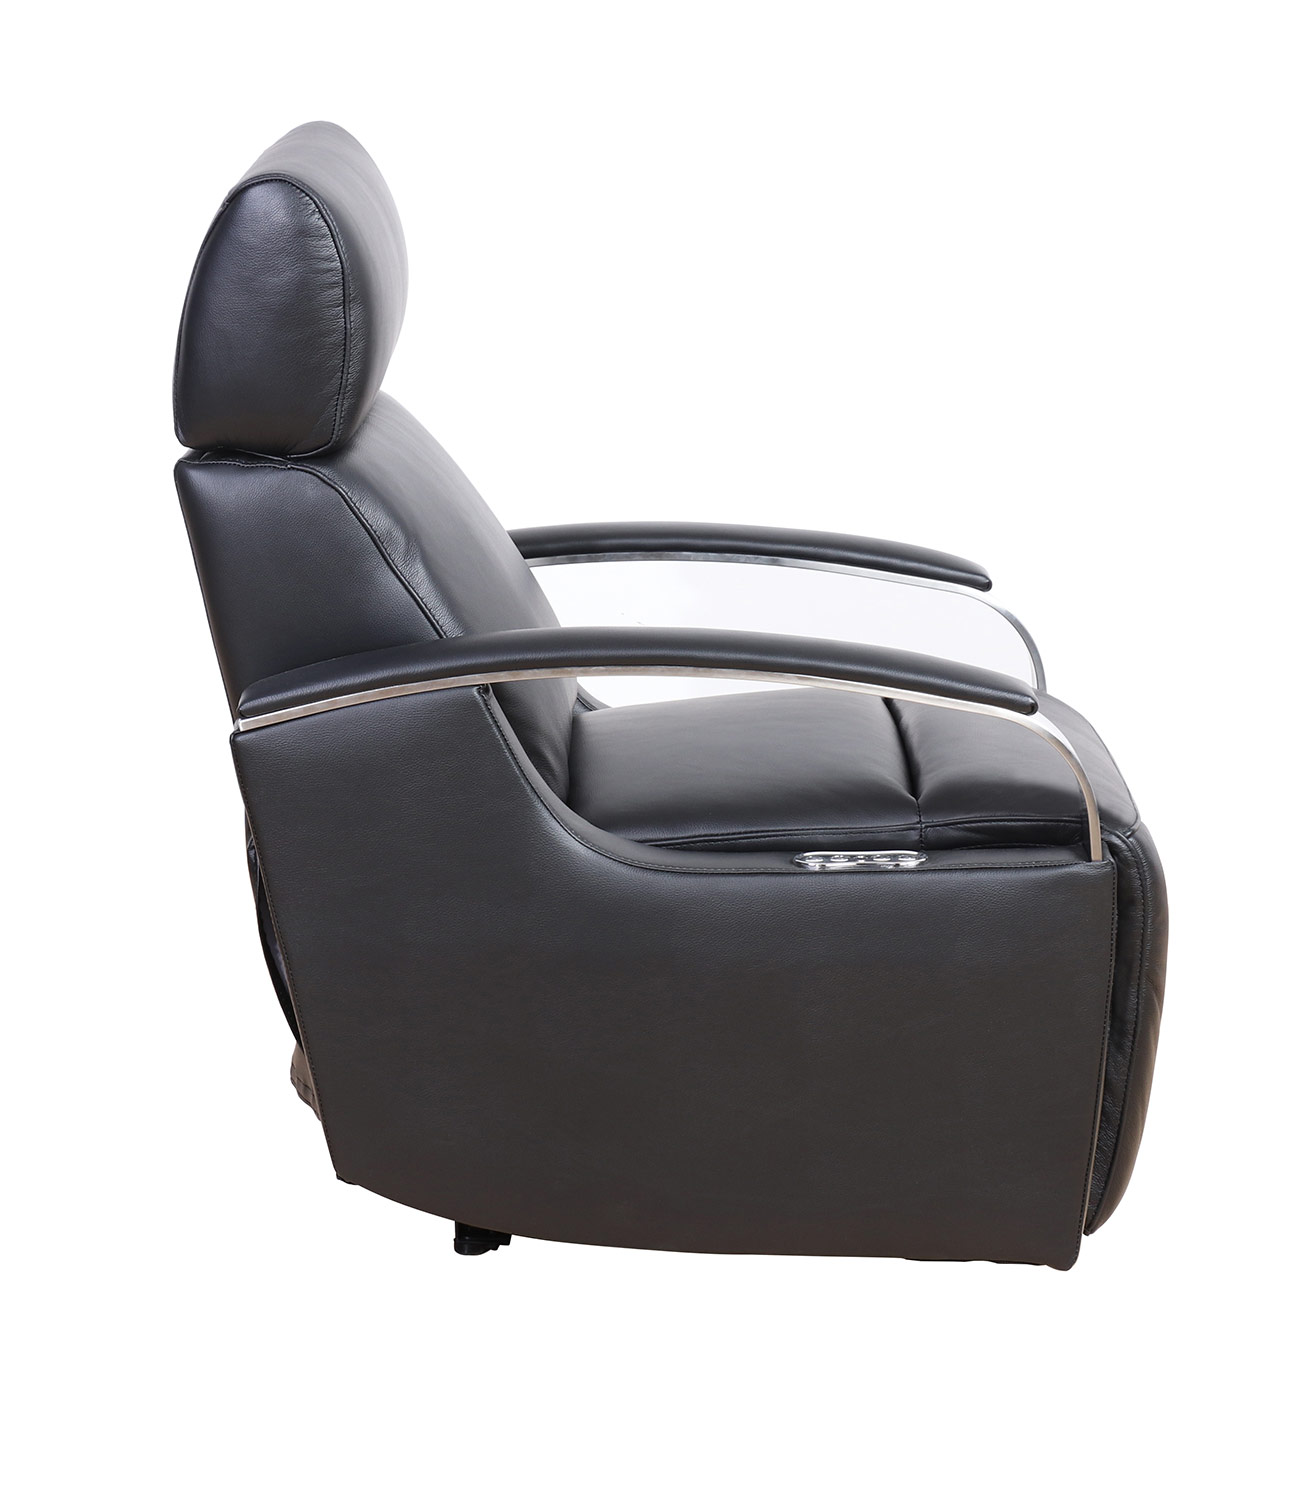 Barcalounger Cosmo Power Recliner Chair with Power Head Rest - Apollo Onyx/Leather Match